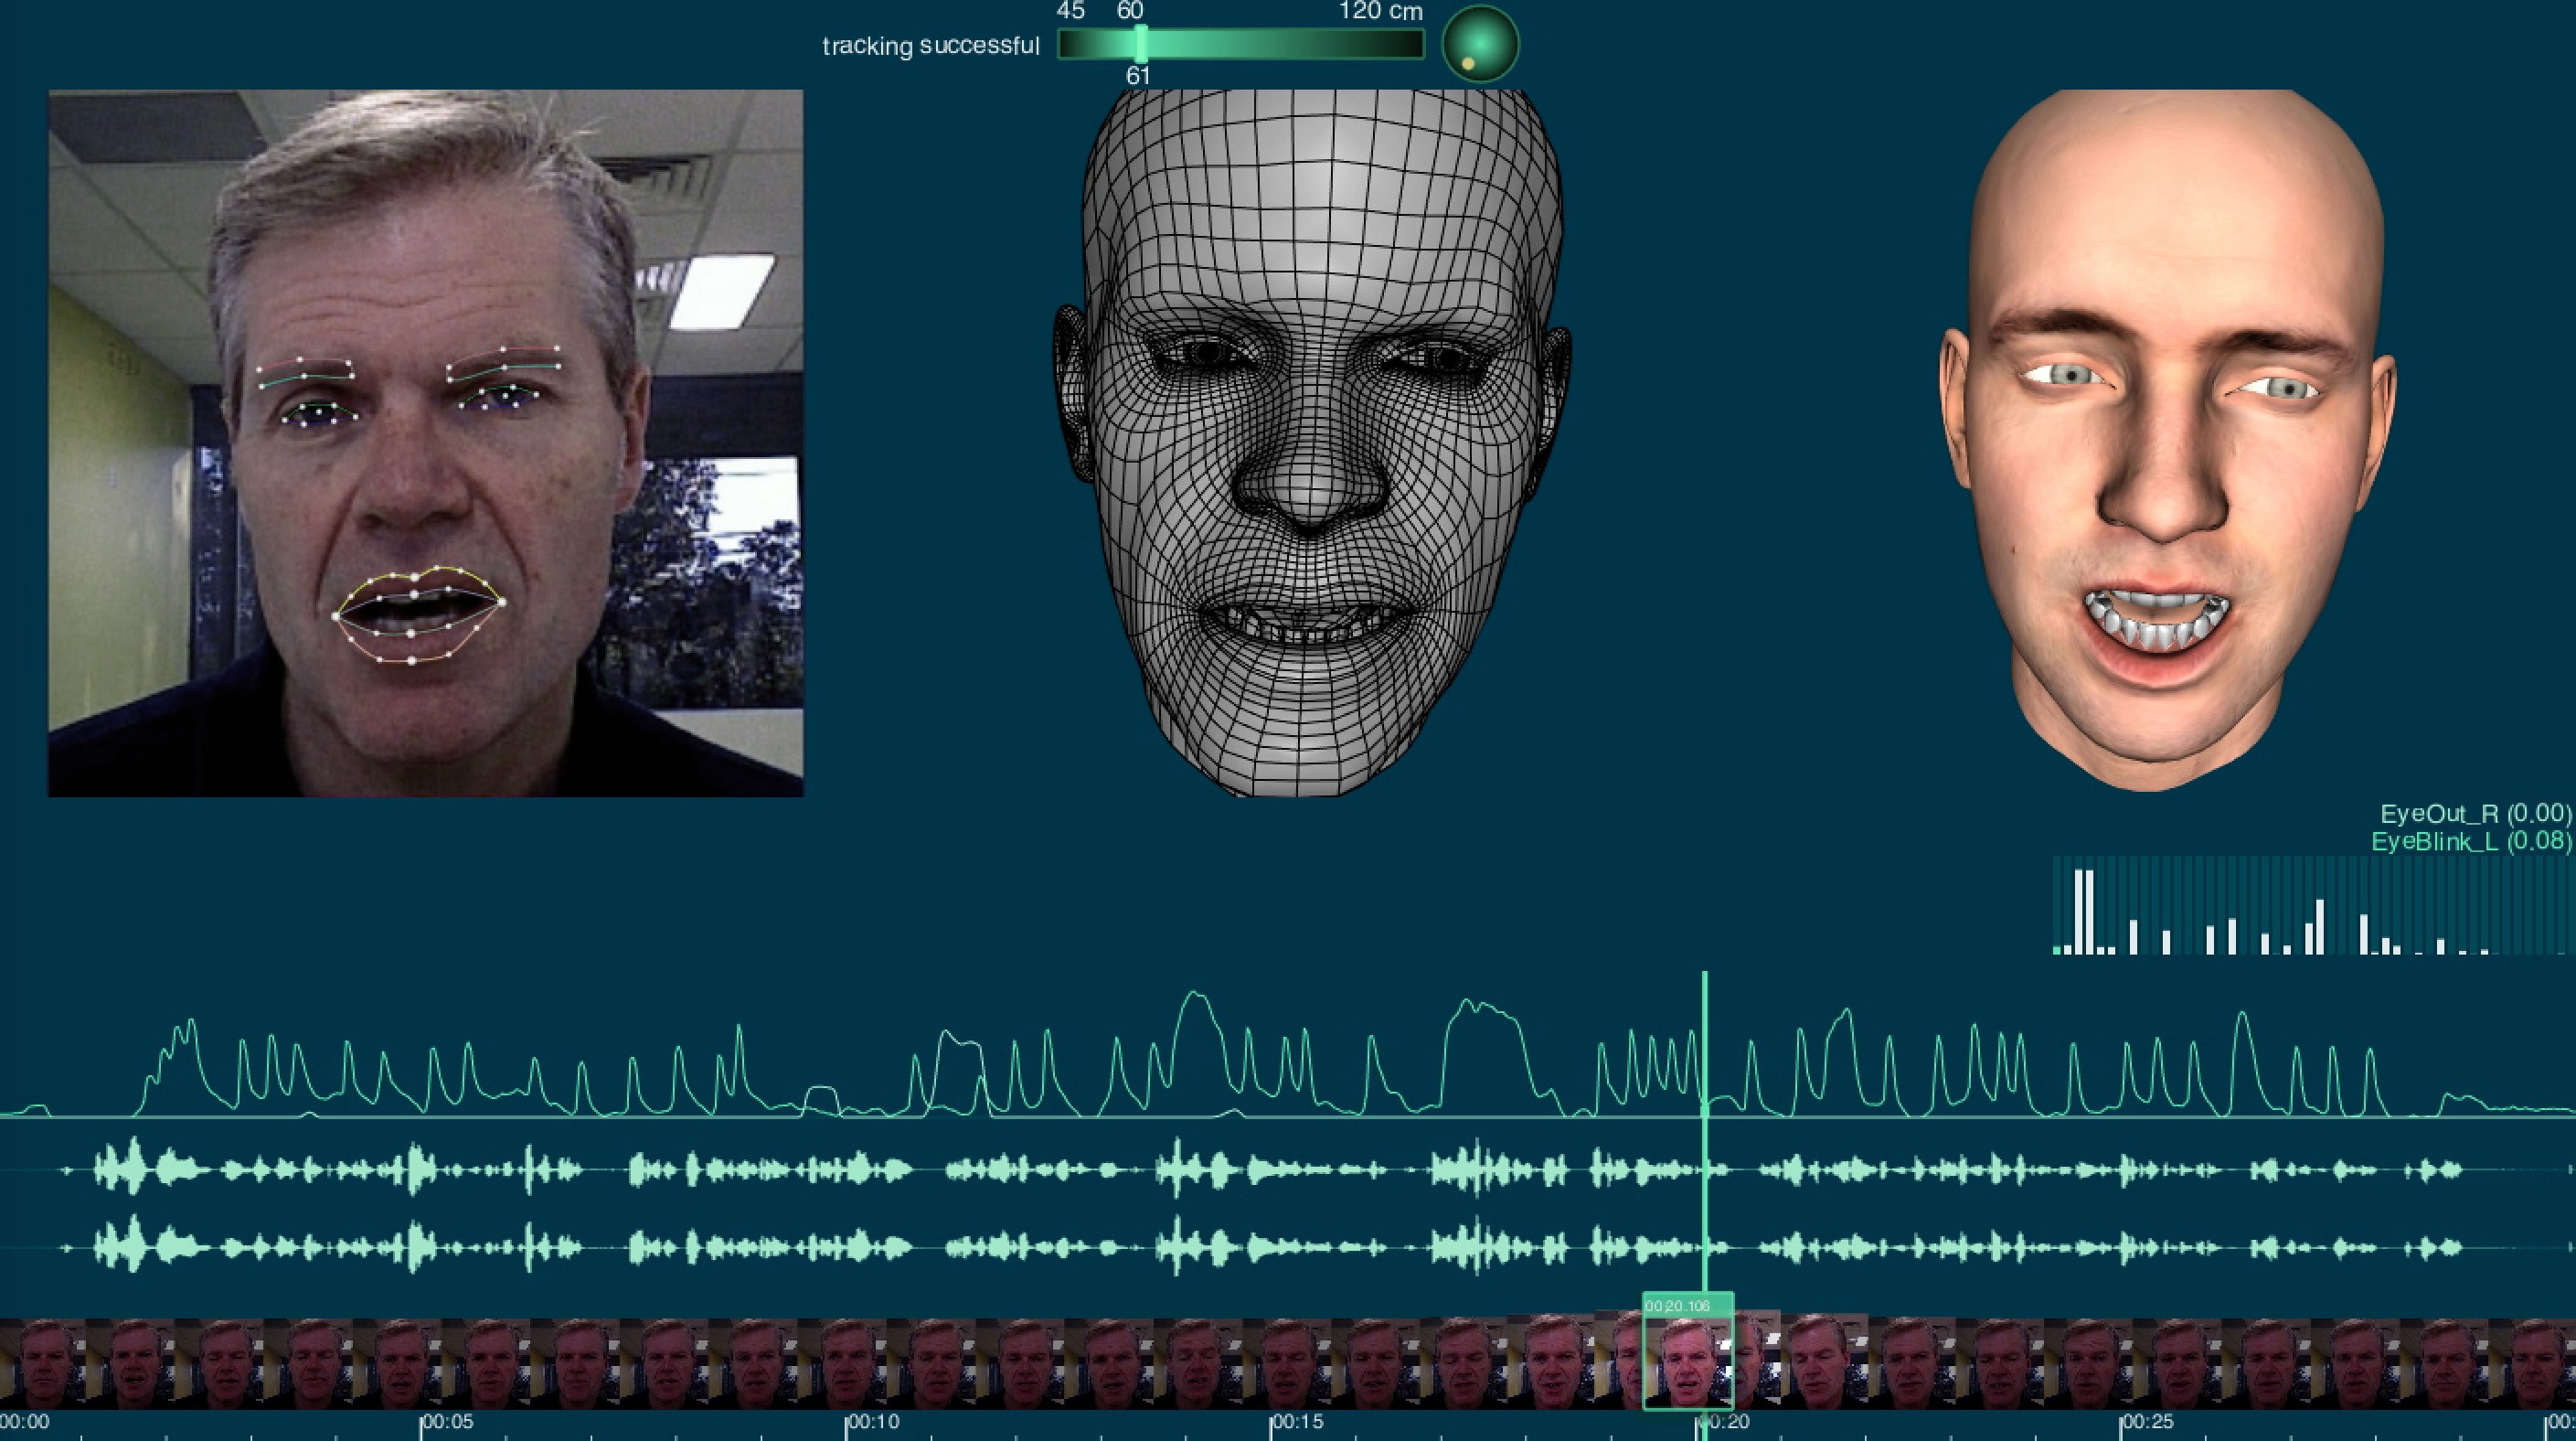 Performance driven facial animation - fxguide